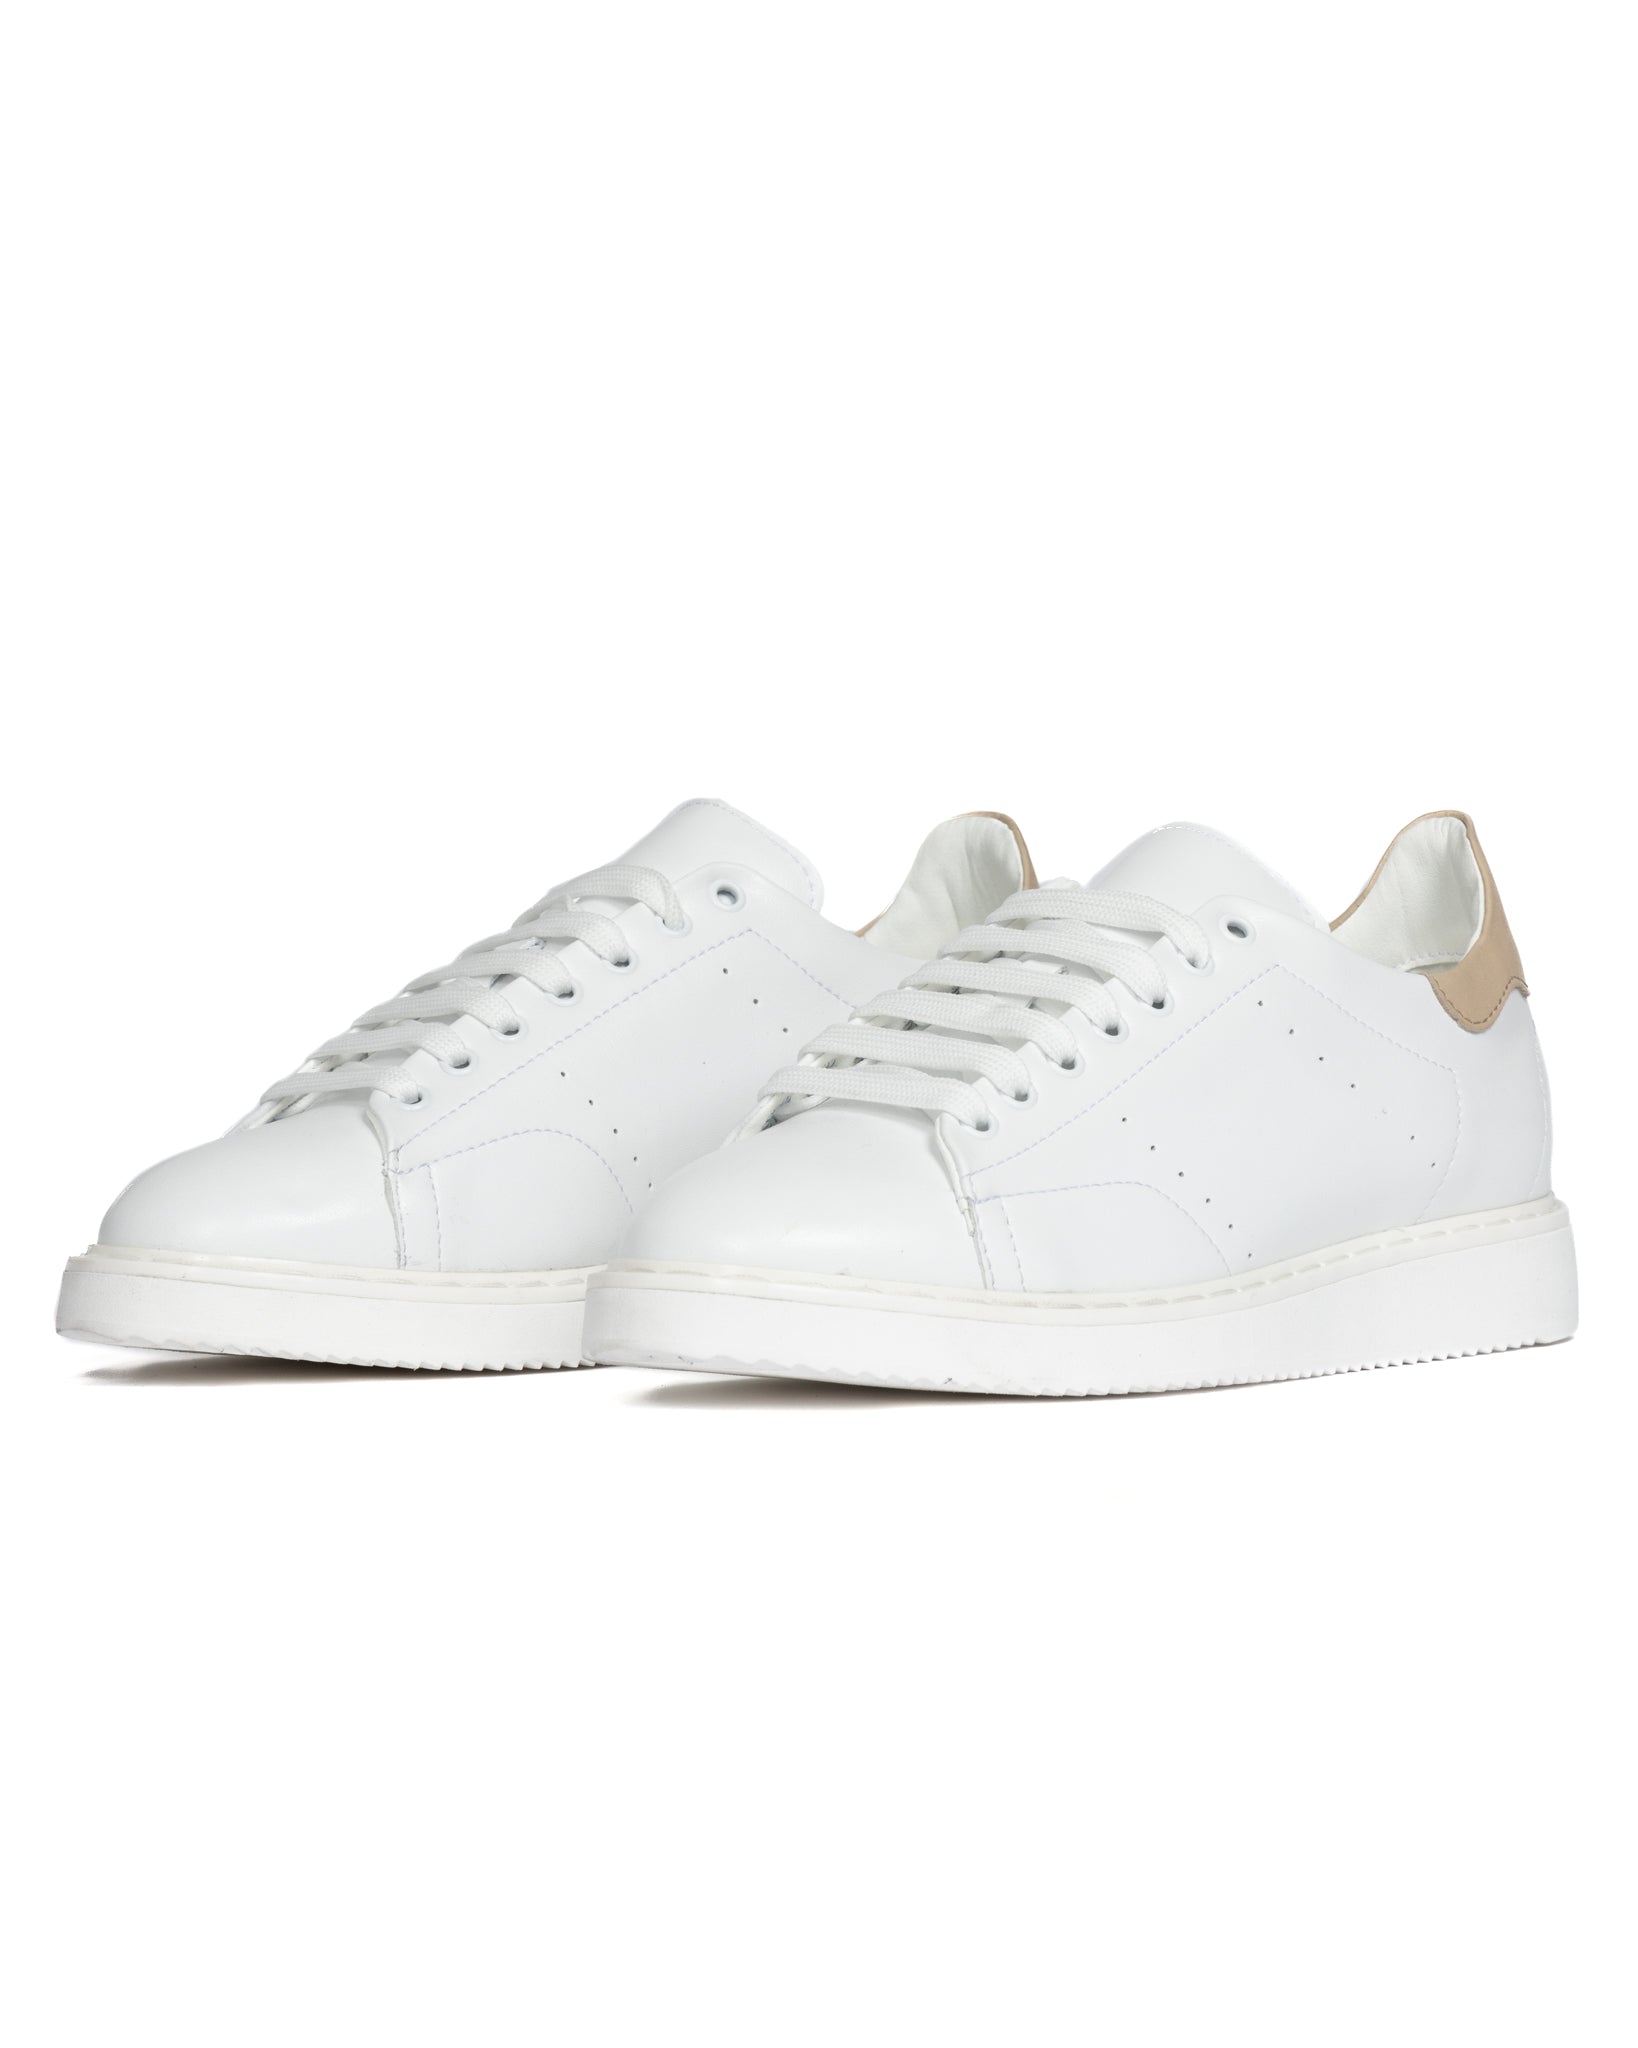 S01 - white leather sneakers with beige details